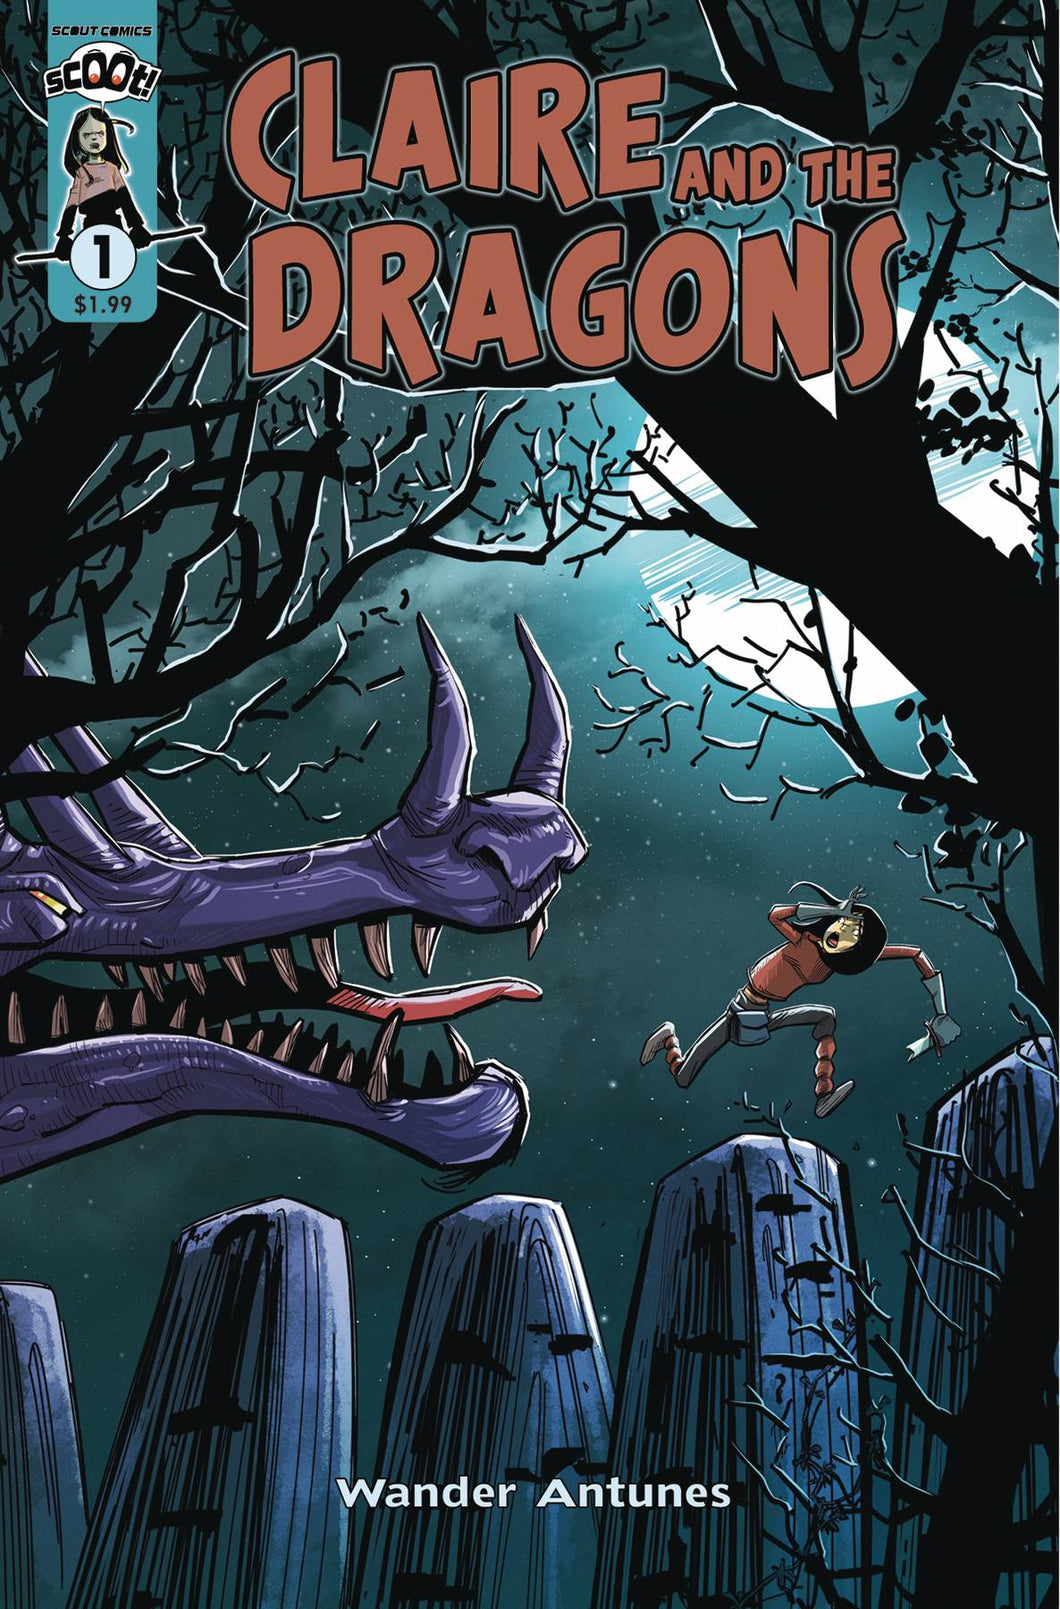 Claire and the Dragons #1 (Cover A - Antunes)